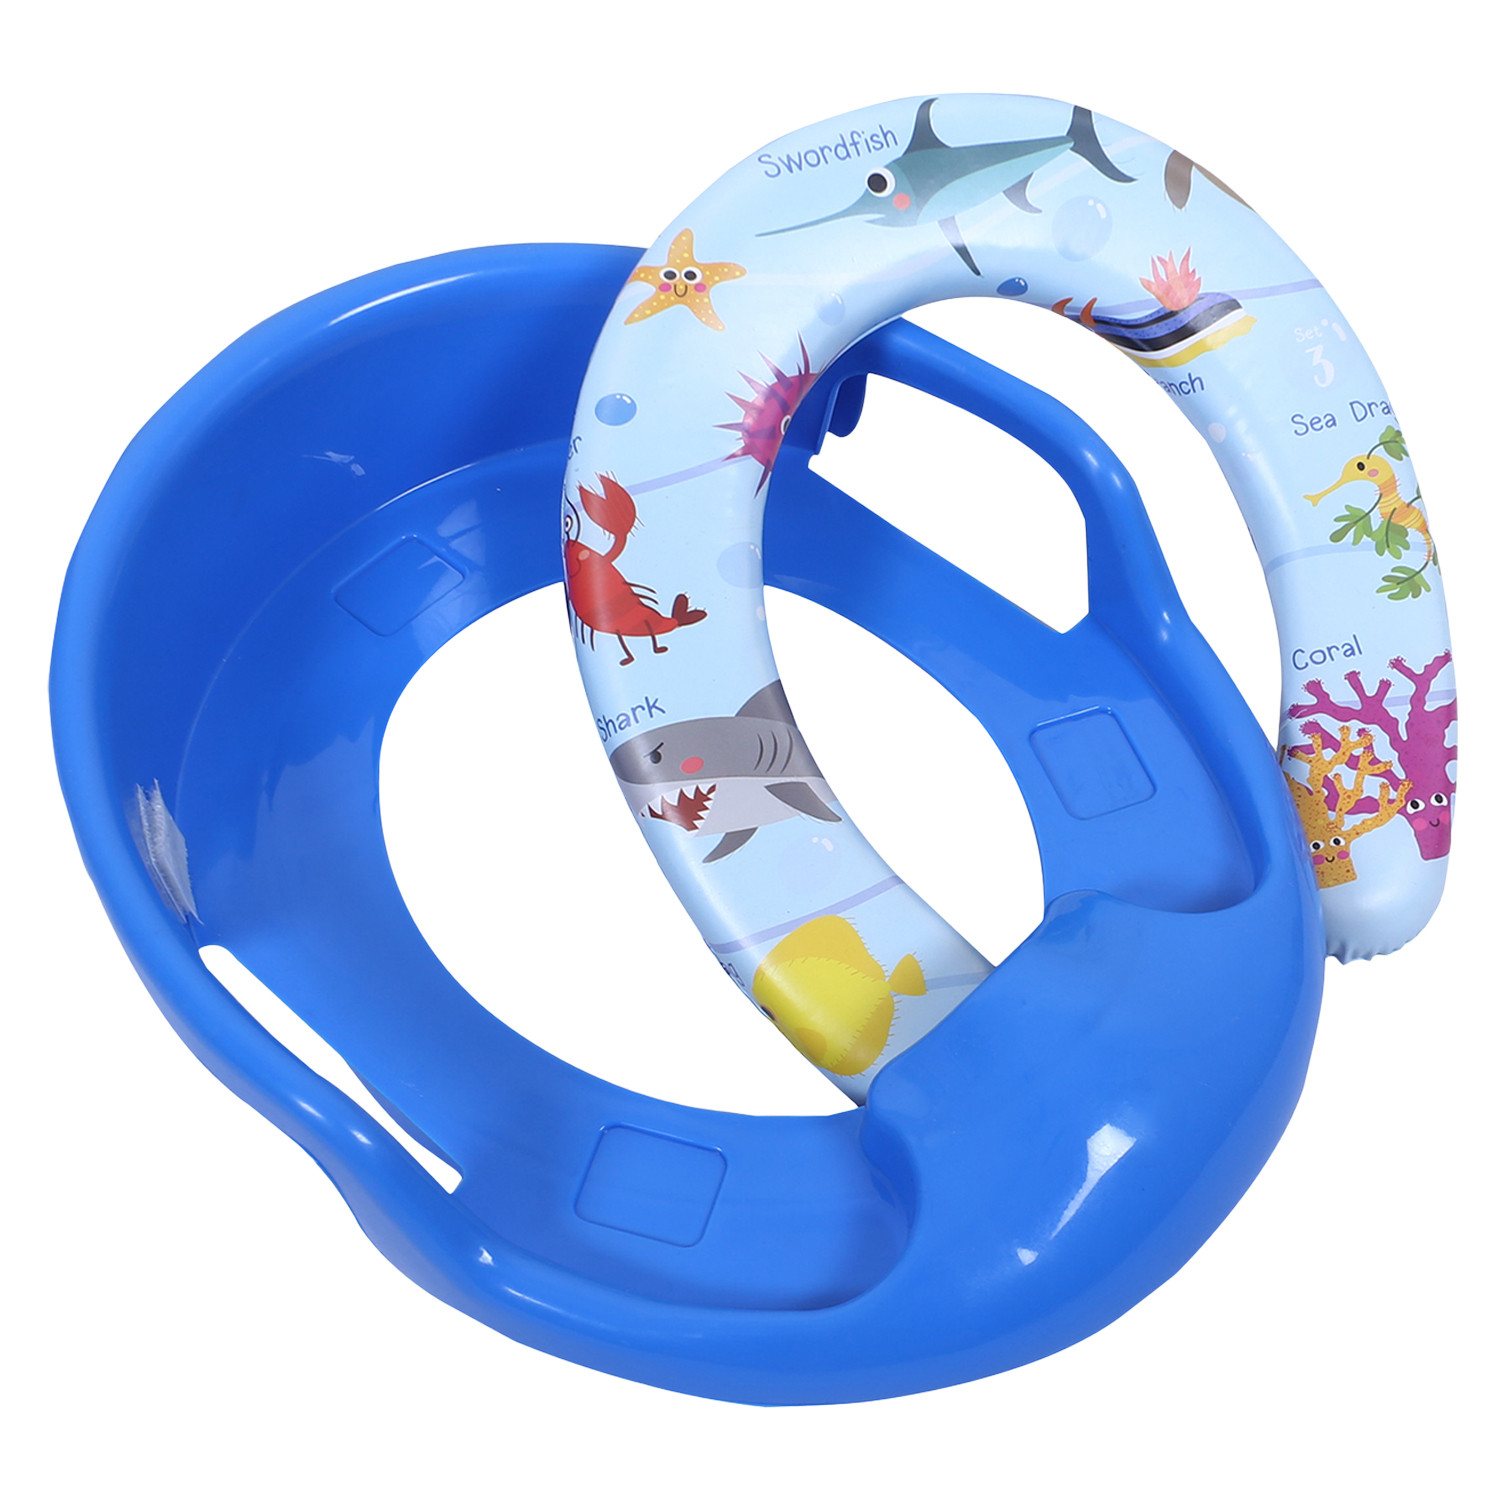 Kuber Industries Kids Potty Seat | Plastic Cushioned Potty Seat | Kids Toilet Seat with Handle | Potty Training Seat for Kids | Cushioned Toilet Stand for Kids | Blue